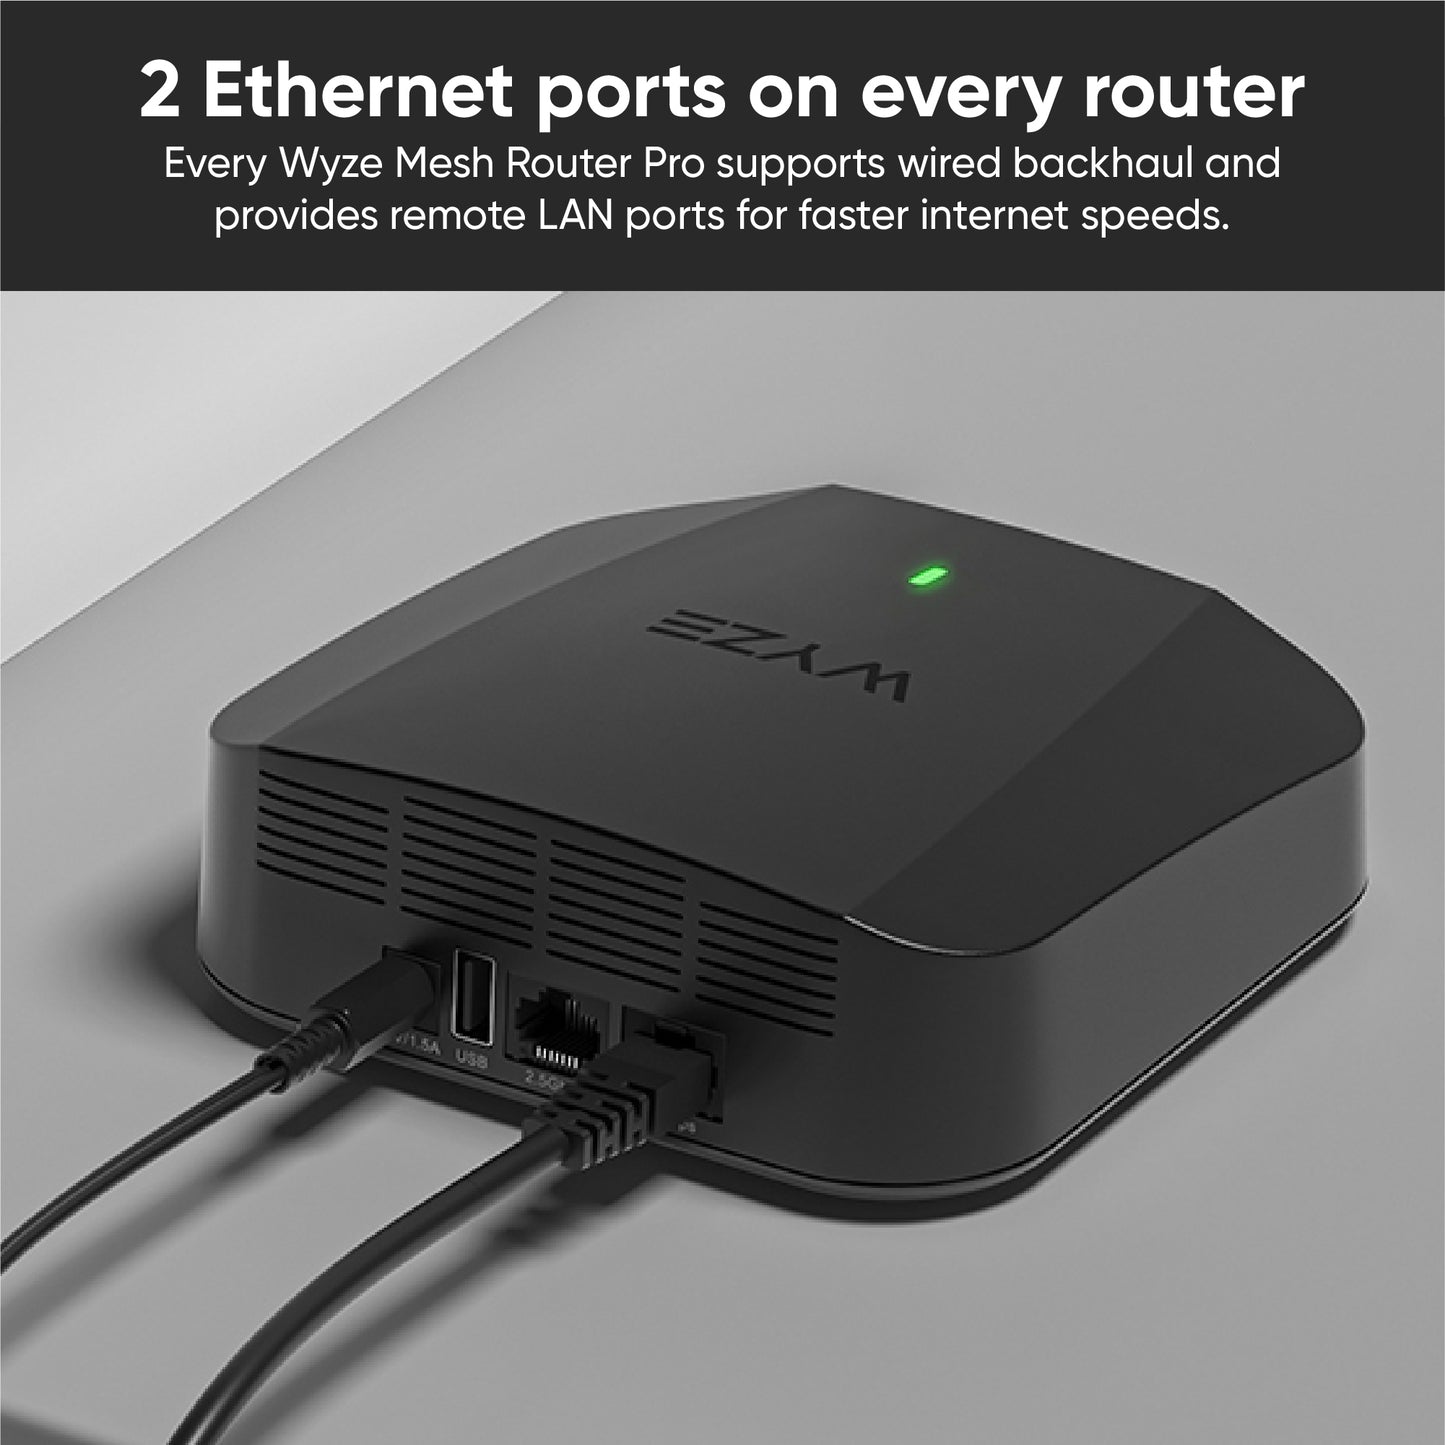 The rear of Wyze Mesh Router Pro with its two ethernet ports.